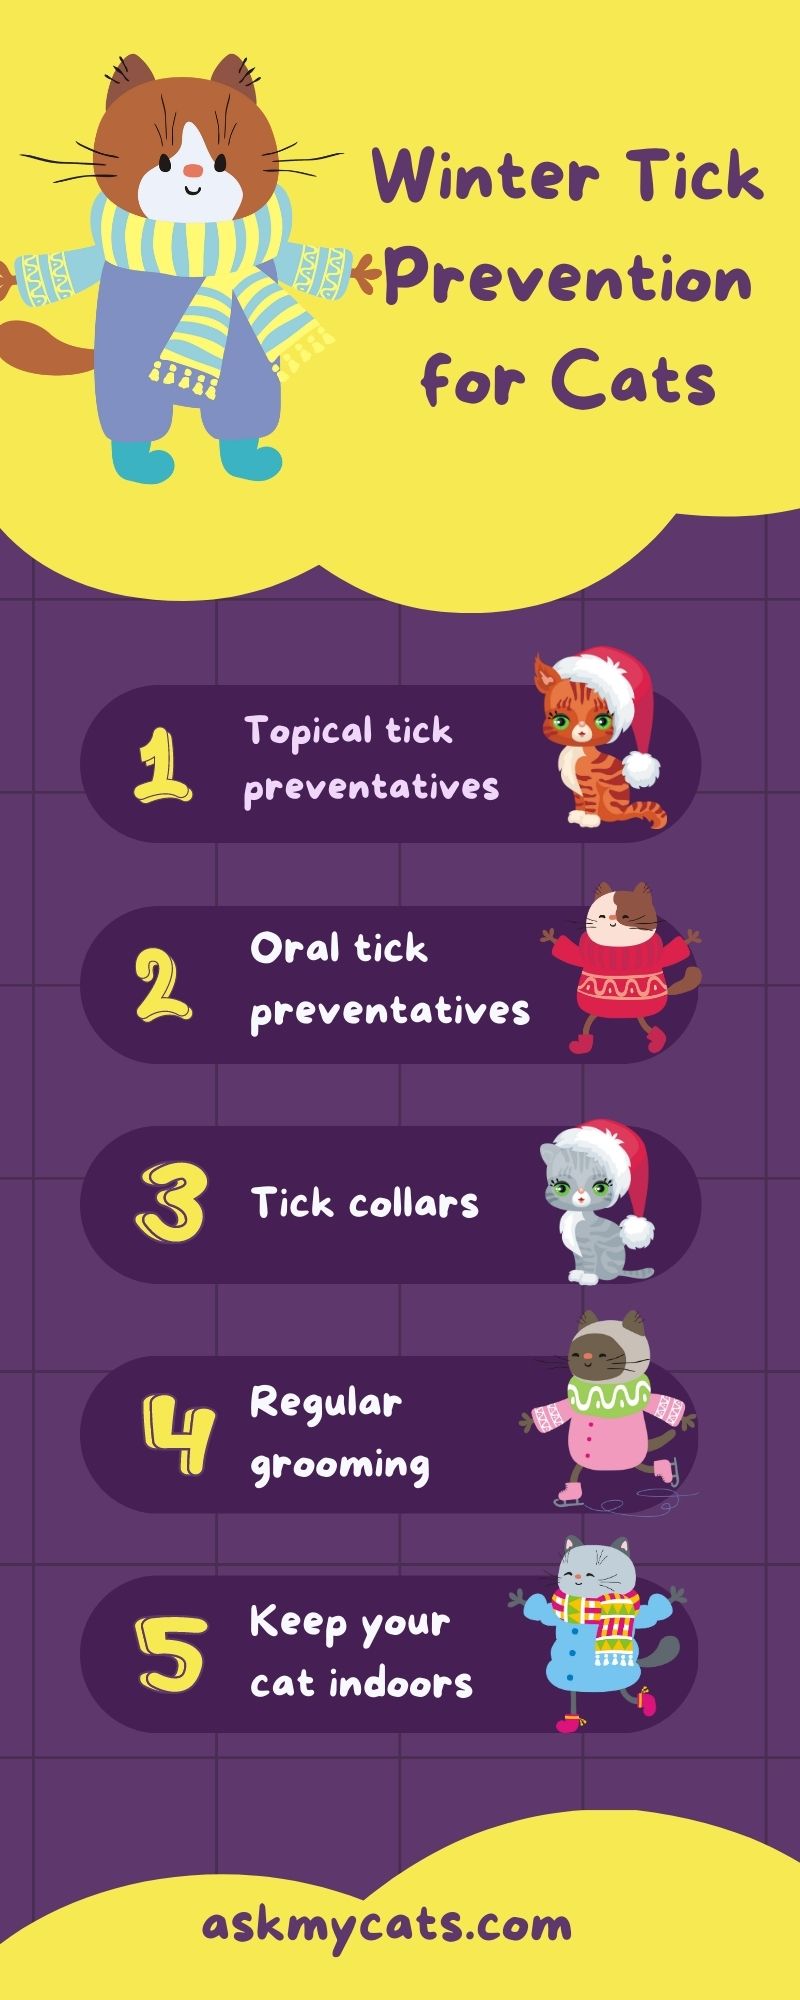 Winter Tick Prevention for Cats (Infographic)